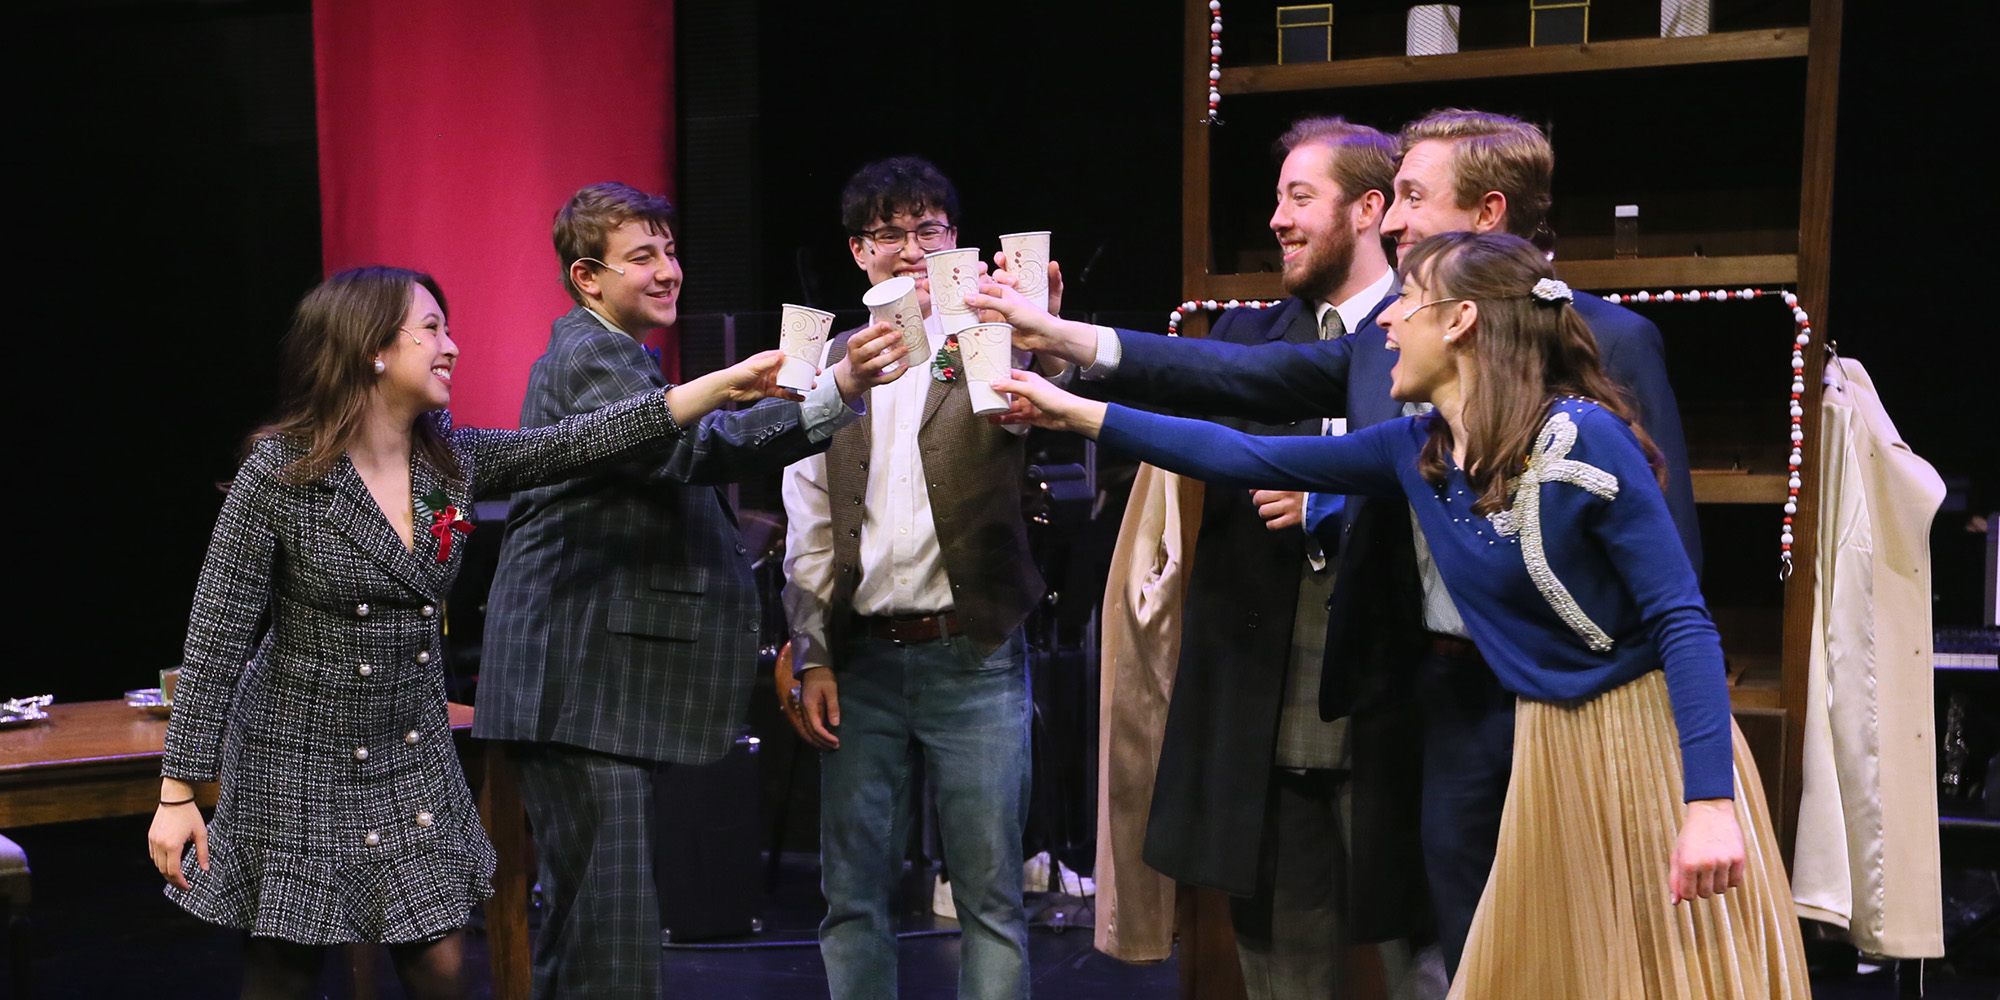 Six actors and actresses in a circle raising their glasses up to 'cheers' together